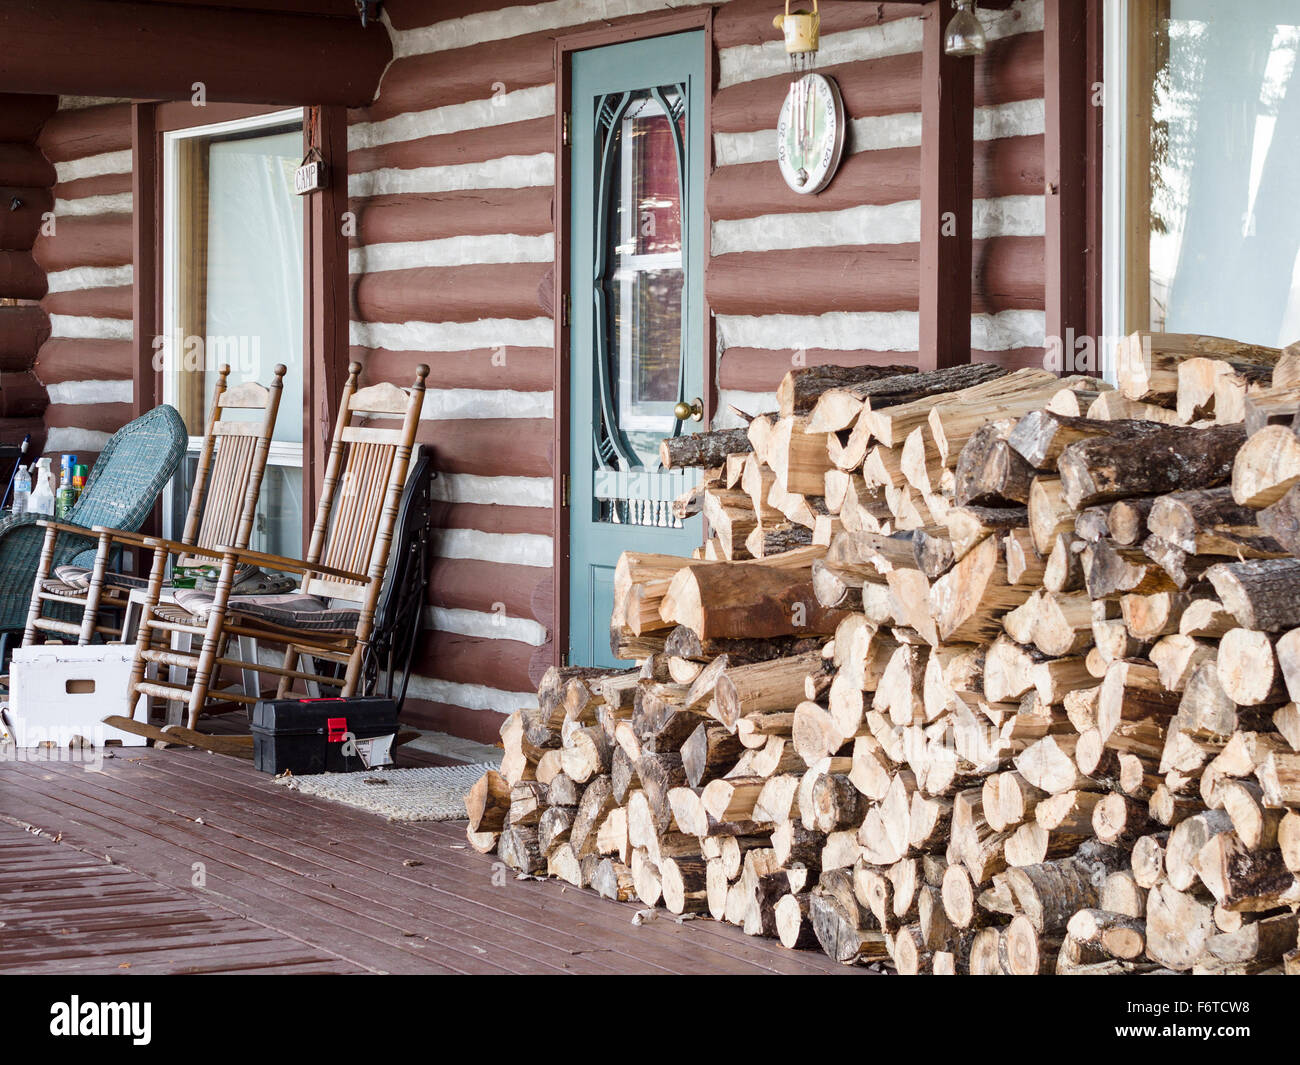 Veranda of a Cottage ready for Winter. With wood piled high and rocking chairs pushed against the wall, the front porch Stock Photo